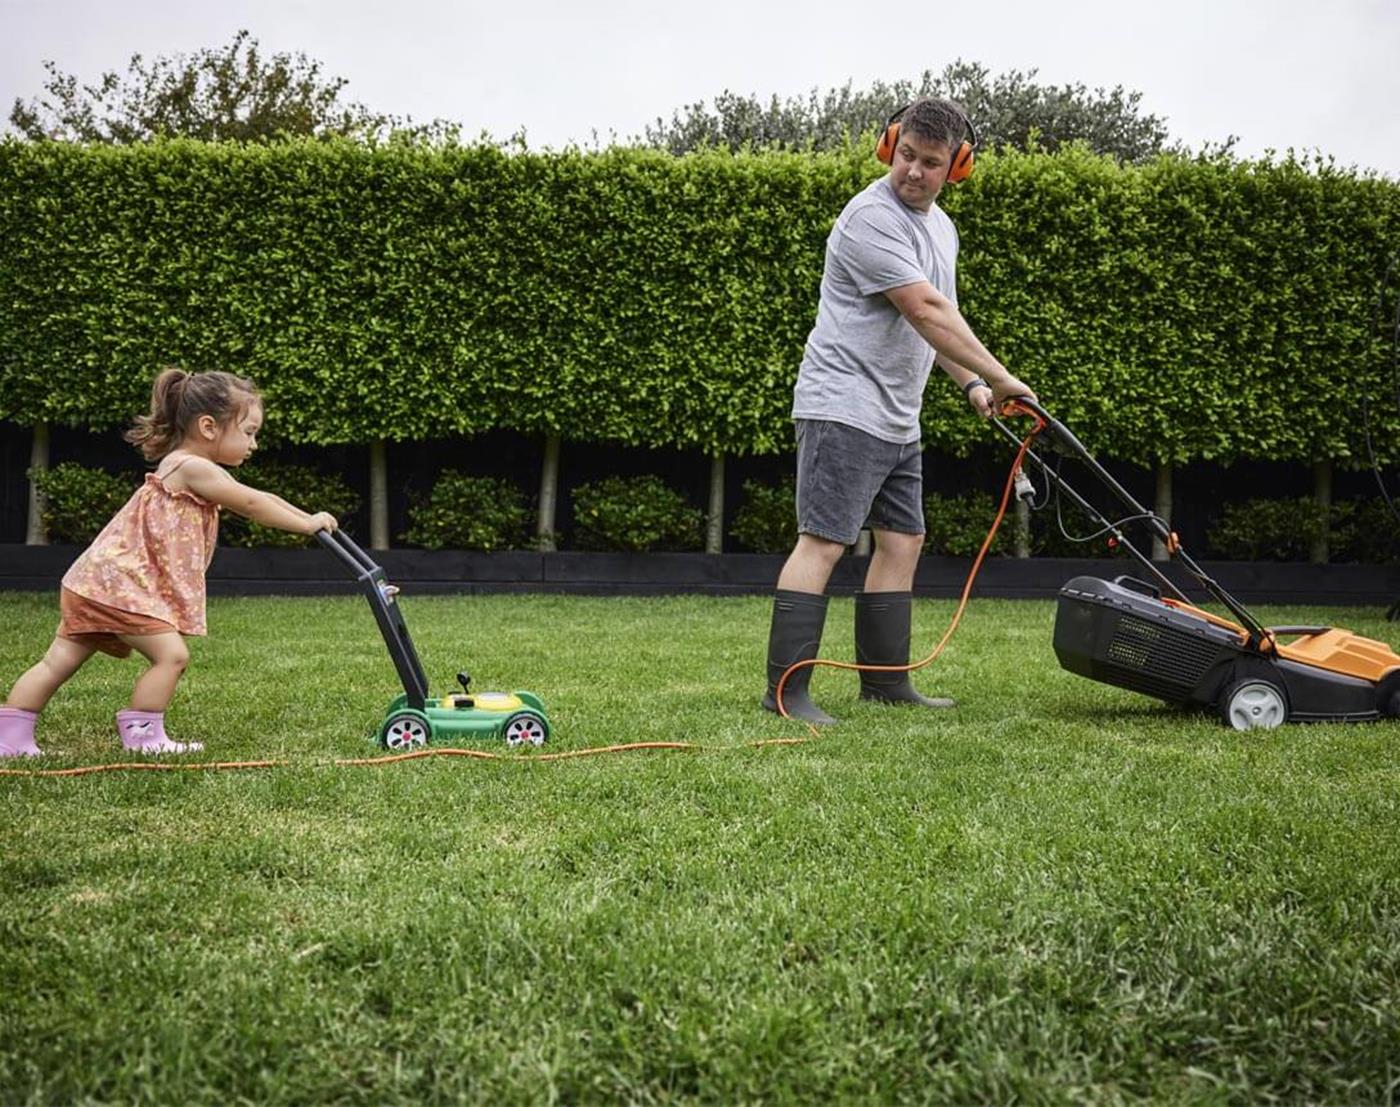 Father and daughter mowing the lawn together with electric mower